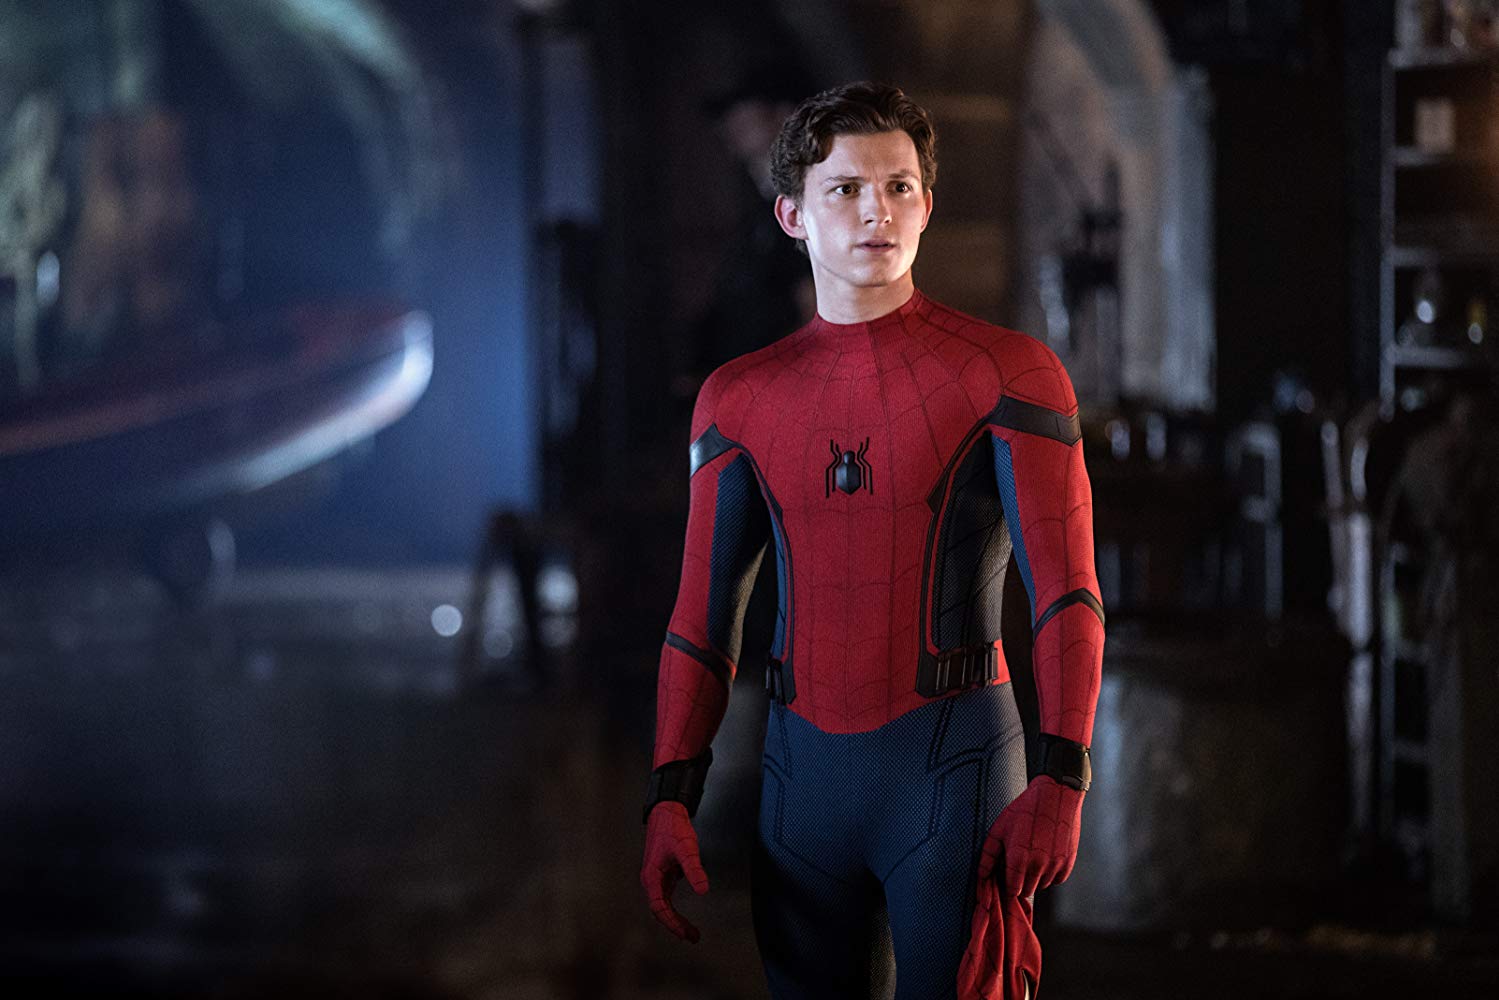 Spider-Man's next movie will be in the MCU after all